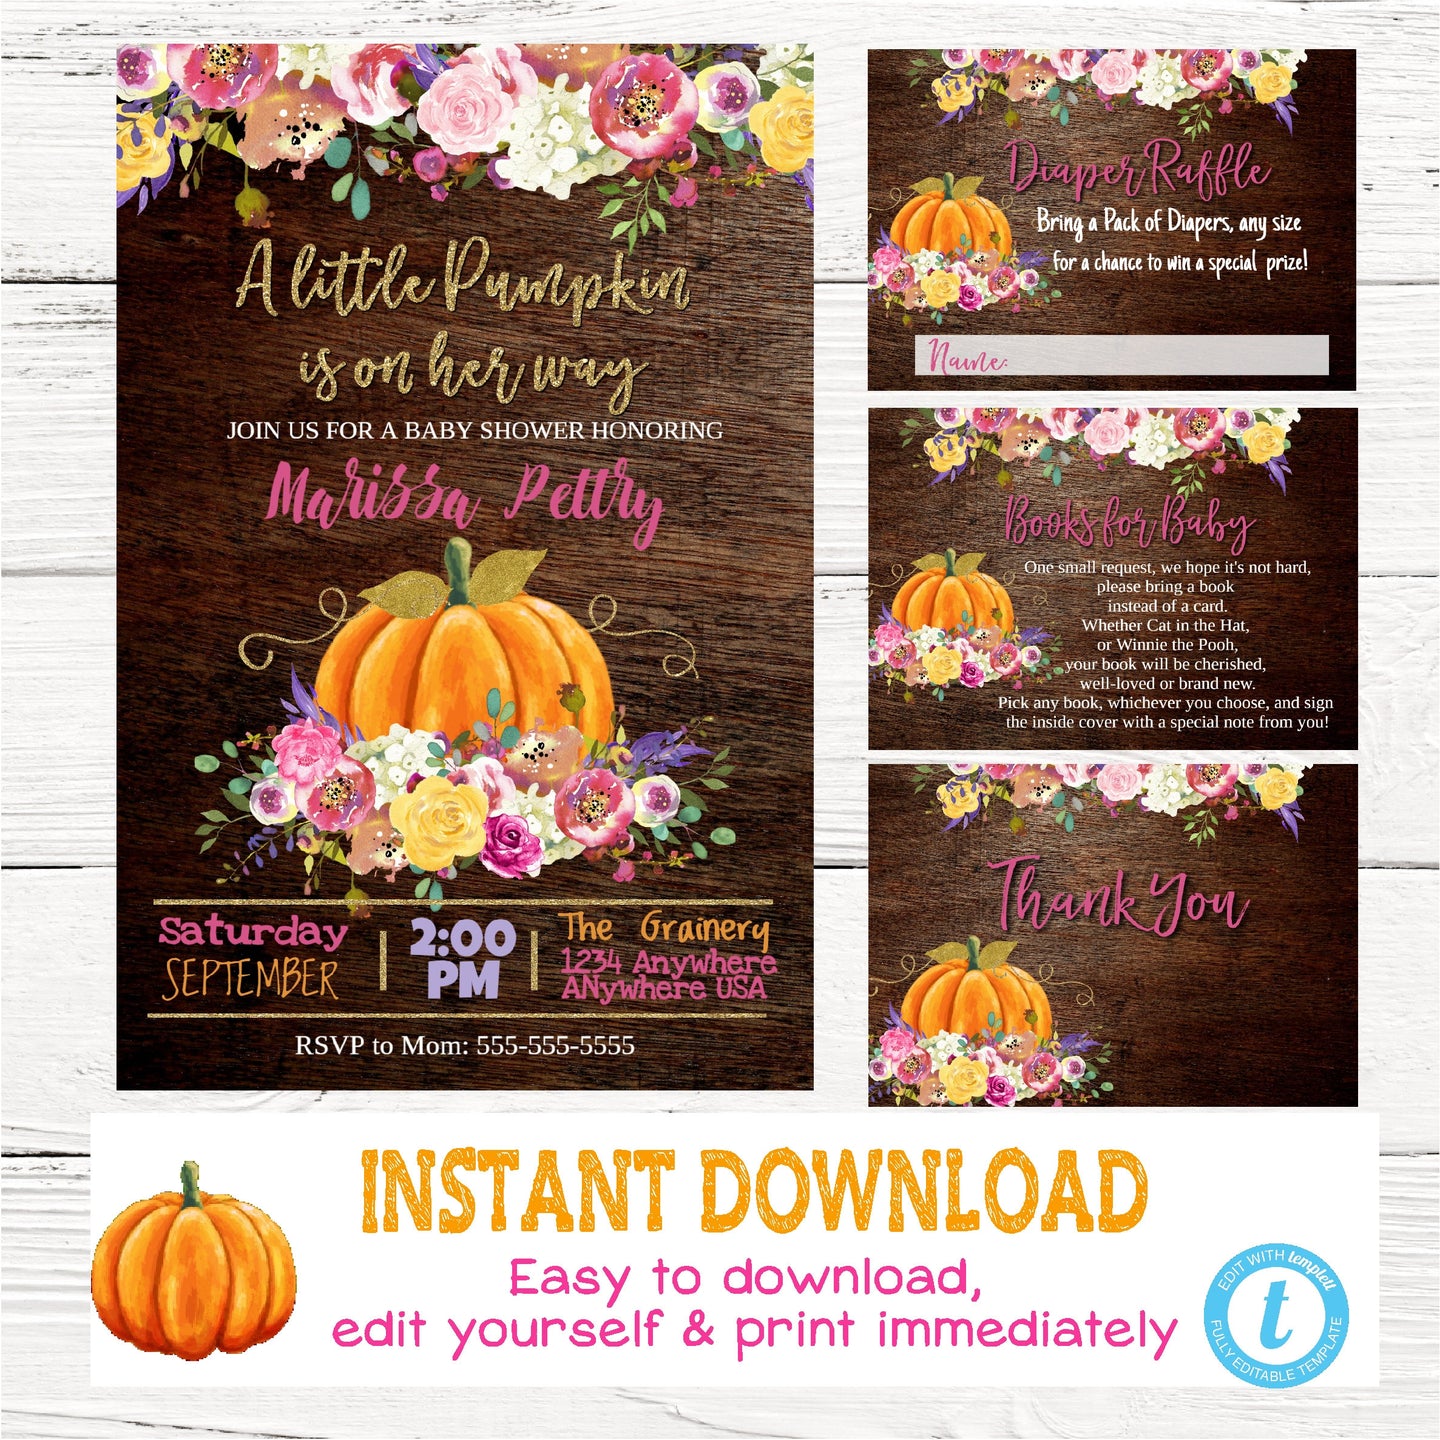 Baby Shower Pumpkin Invitation, Thank You, Diaper Card, Books for baby,Bundle, Floral Invite, Rustic, Fall Baby shower, You edit digital